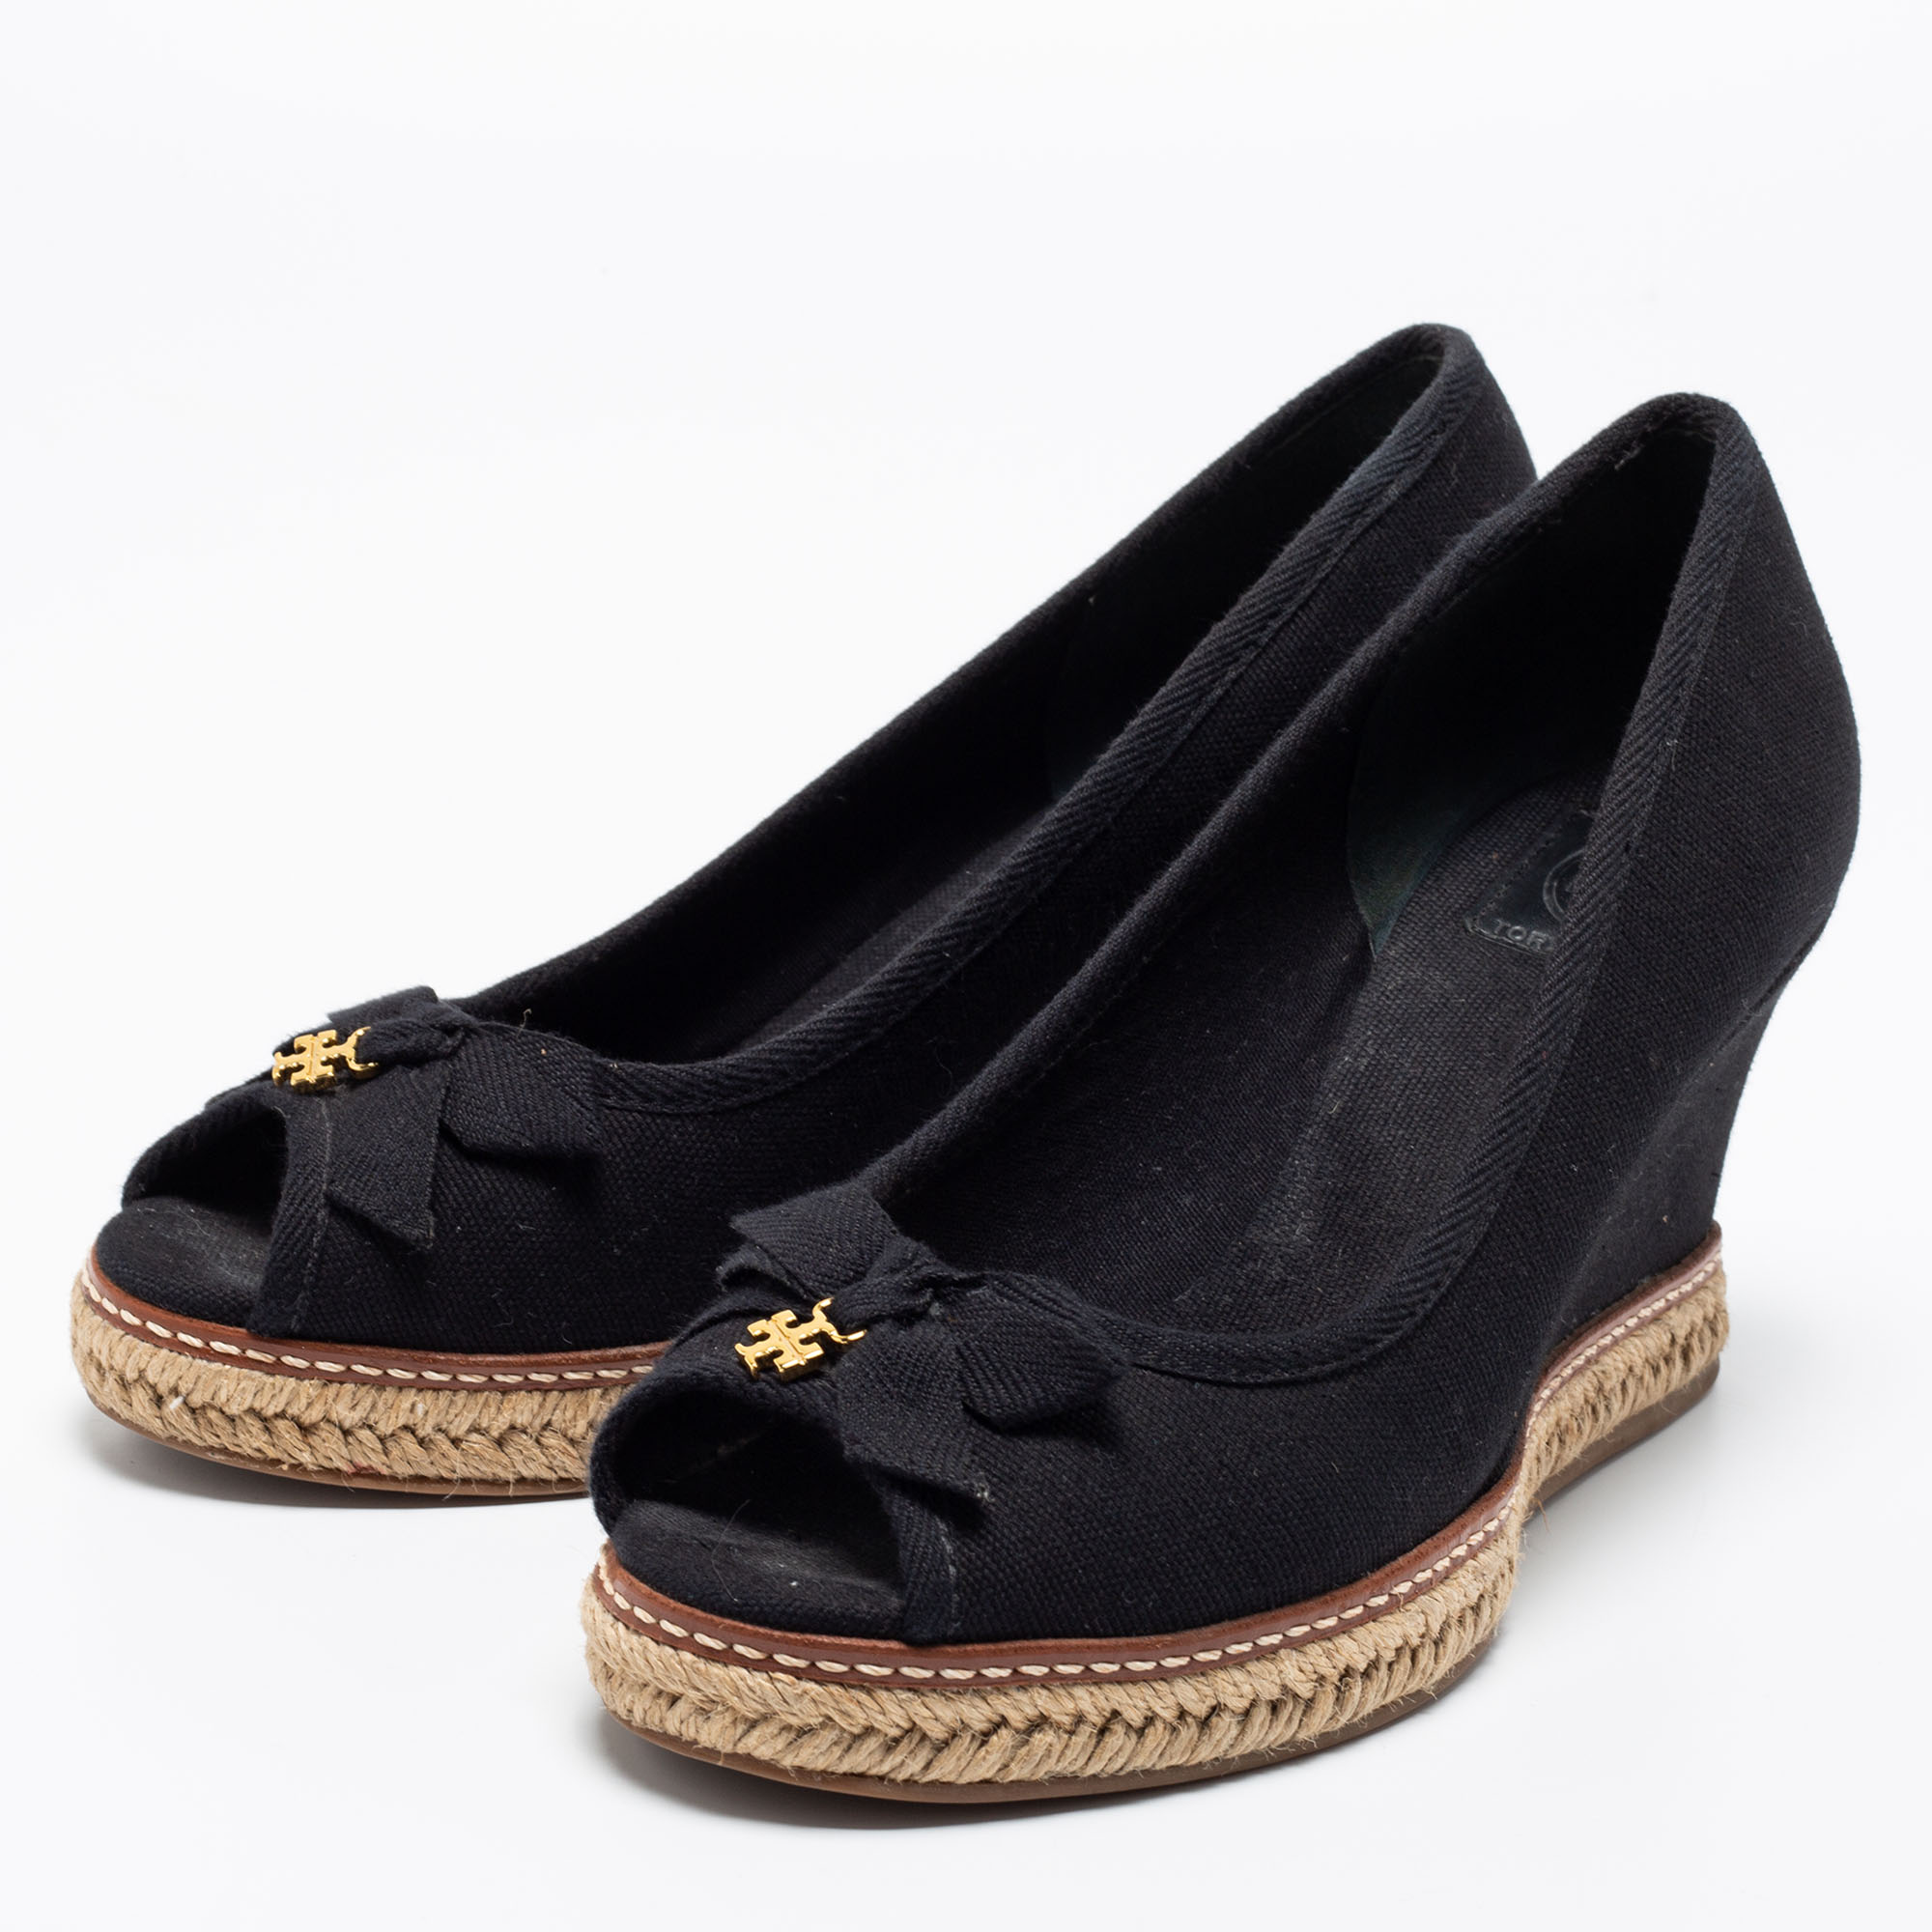 

Tory Burch Black Canvas Jackie Bow Espadrille Wedge Pumps Size